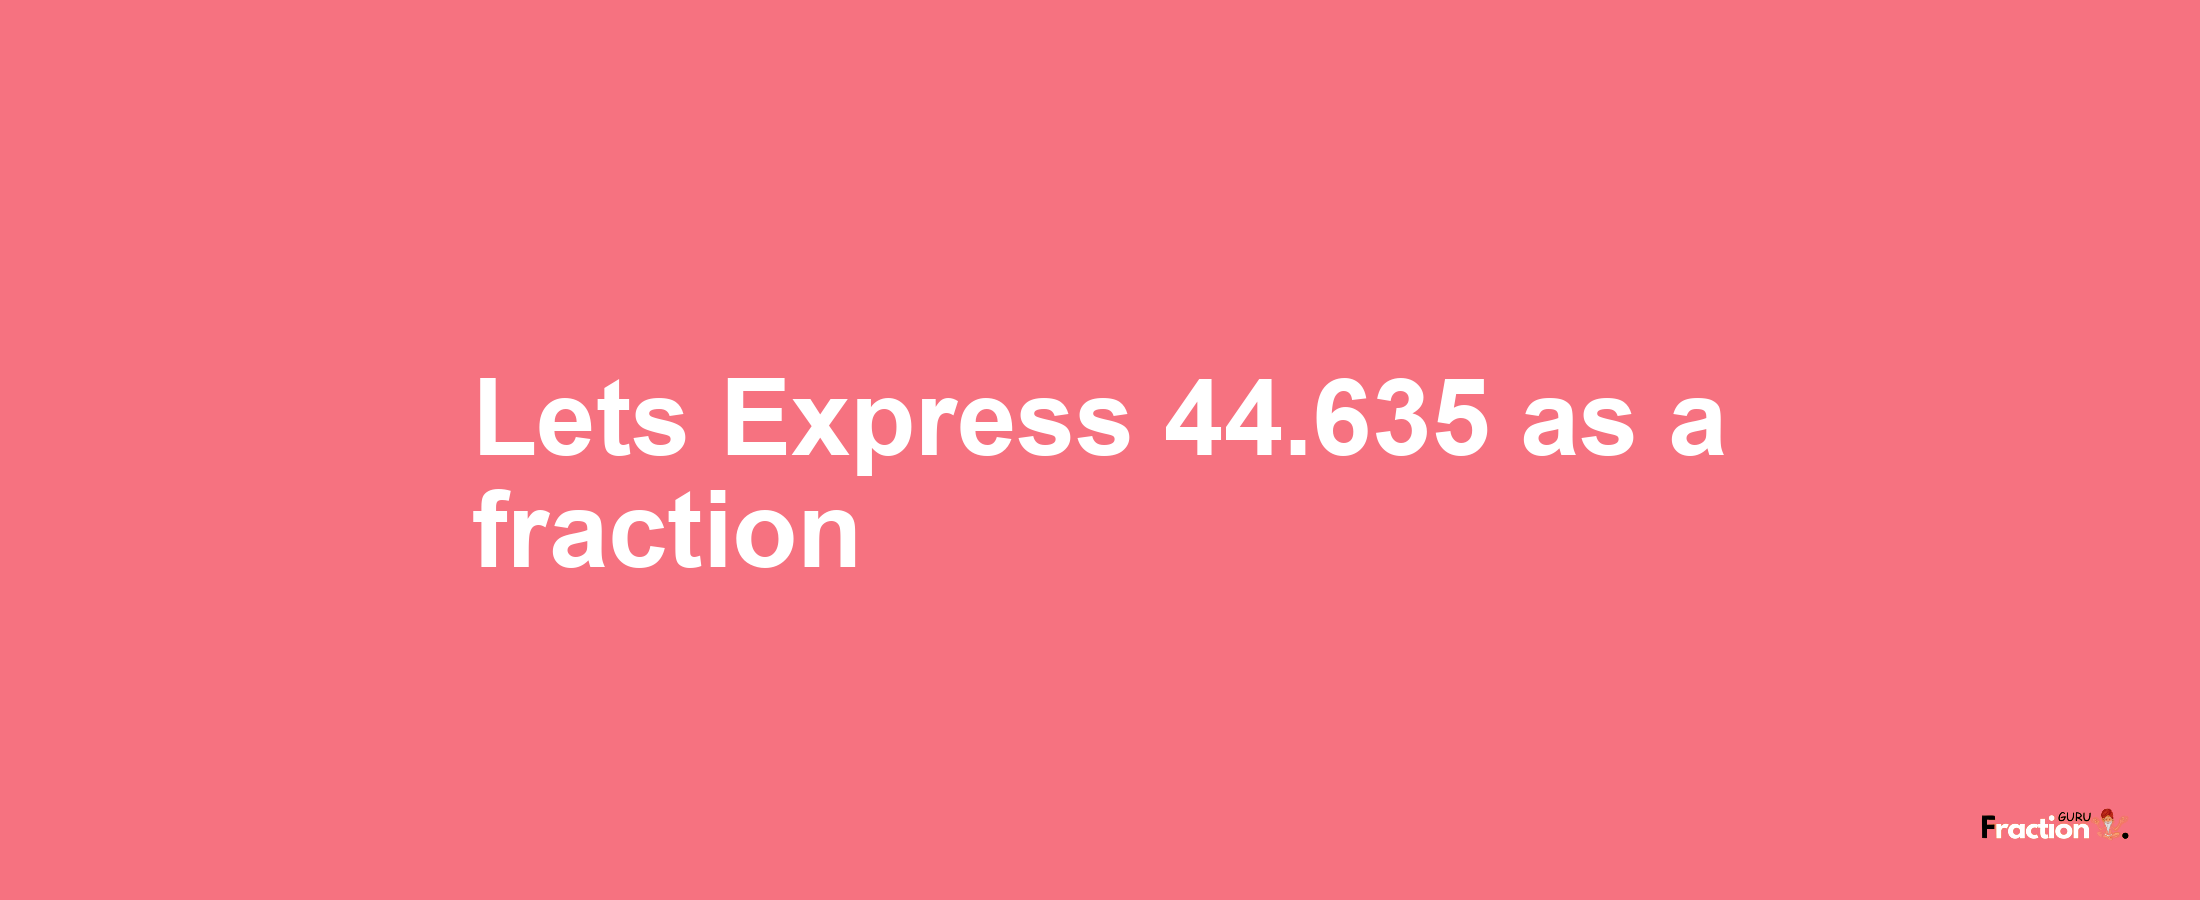 Lets Express 44.635 as afraction